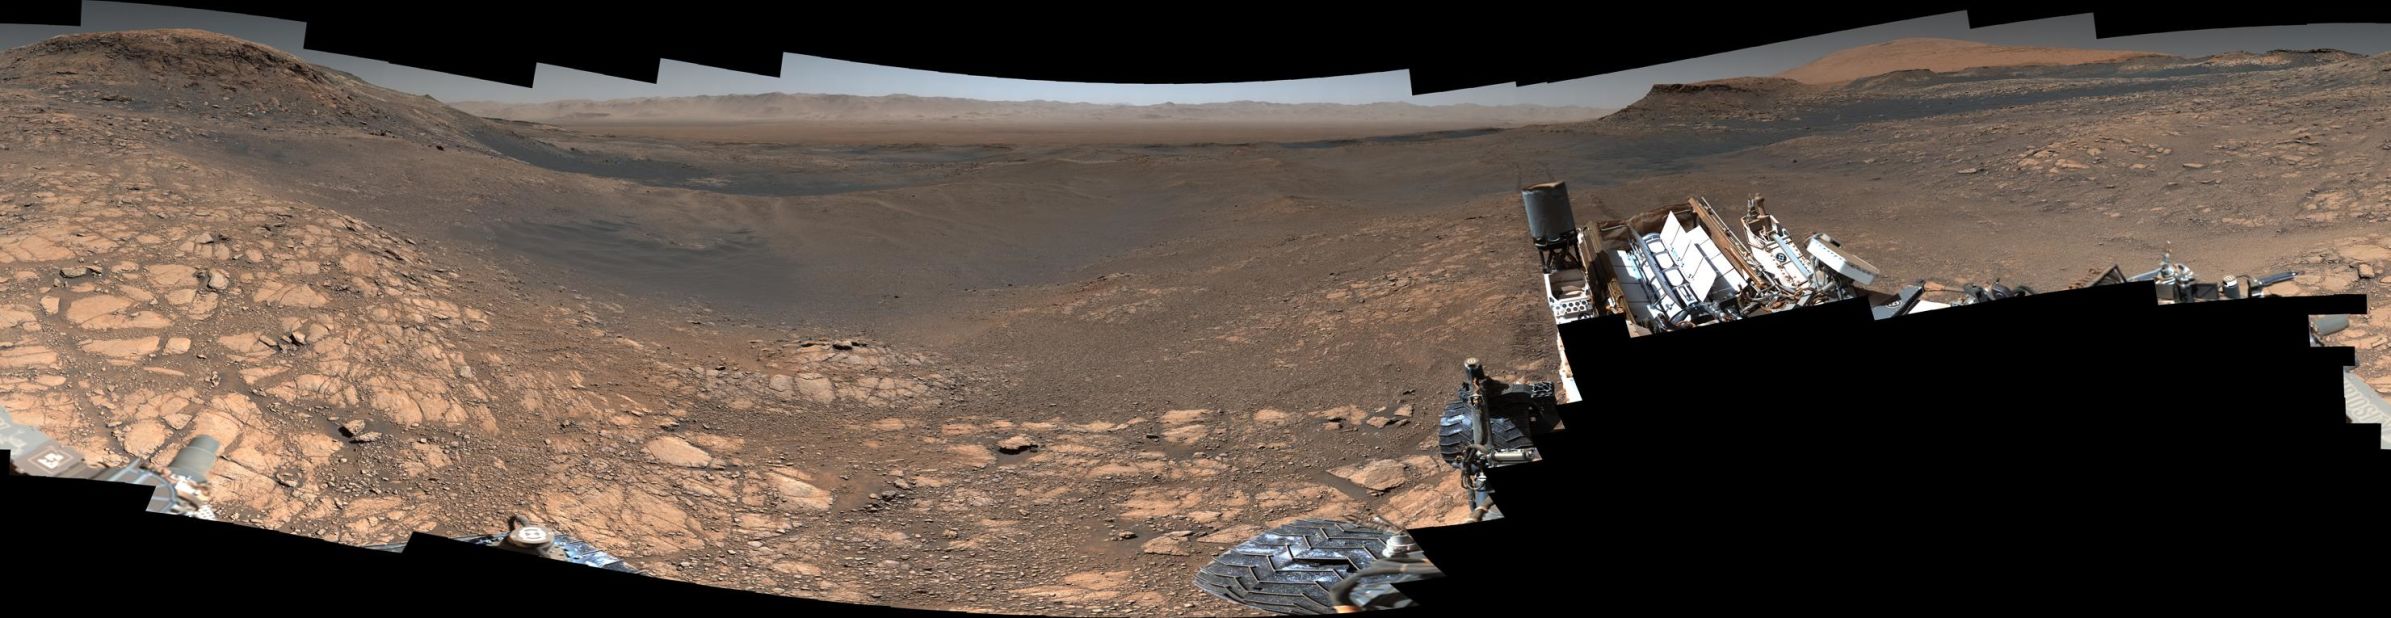 NASA's Curiosity rover captured its highest-resolution panorama, including more than a thousand images and 1.8 billion pixels, of the Martian surface between November 24 and December 1, 2019.